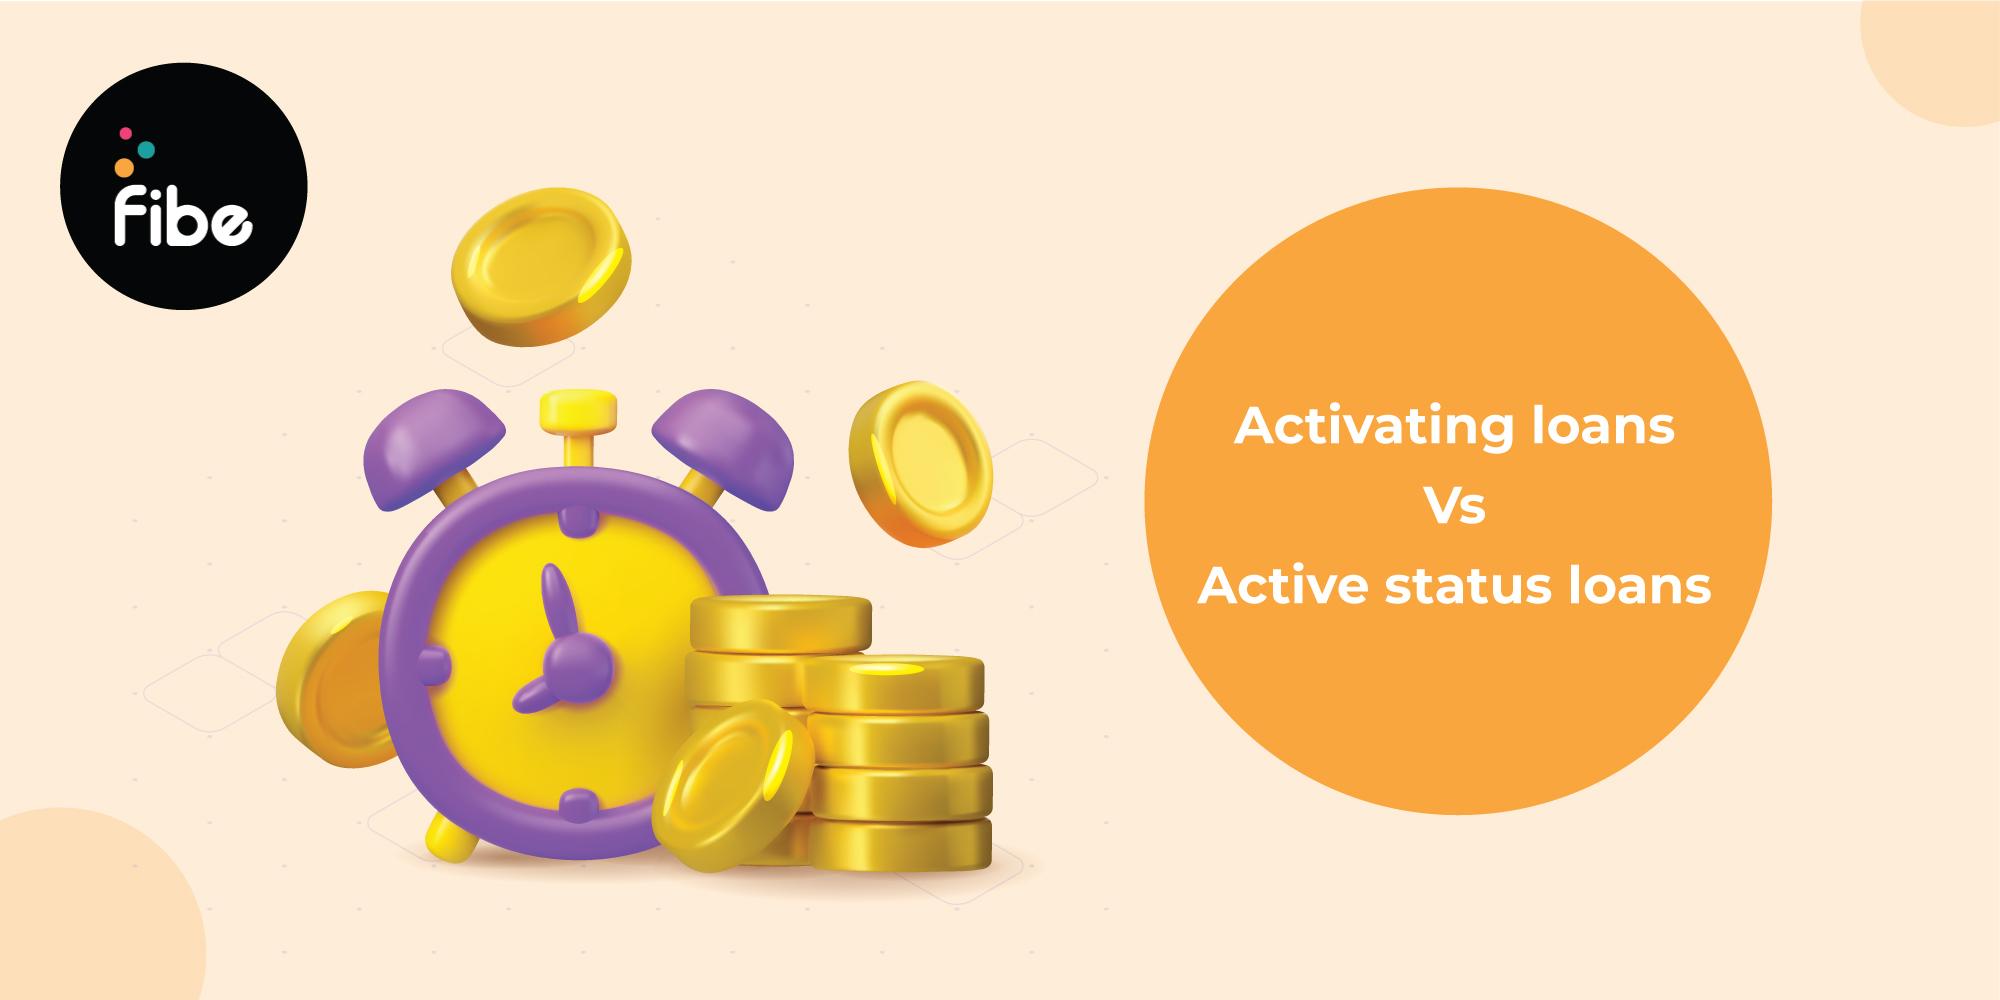 Activating a loan & active status loan: How to check the status